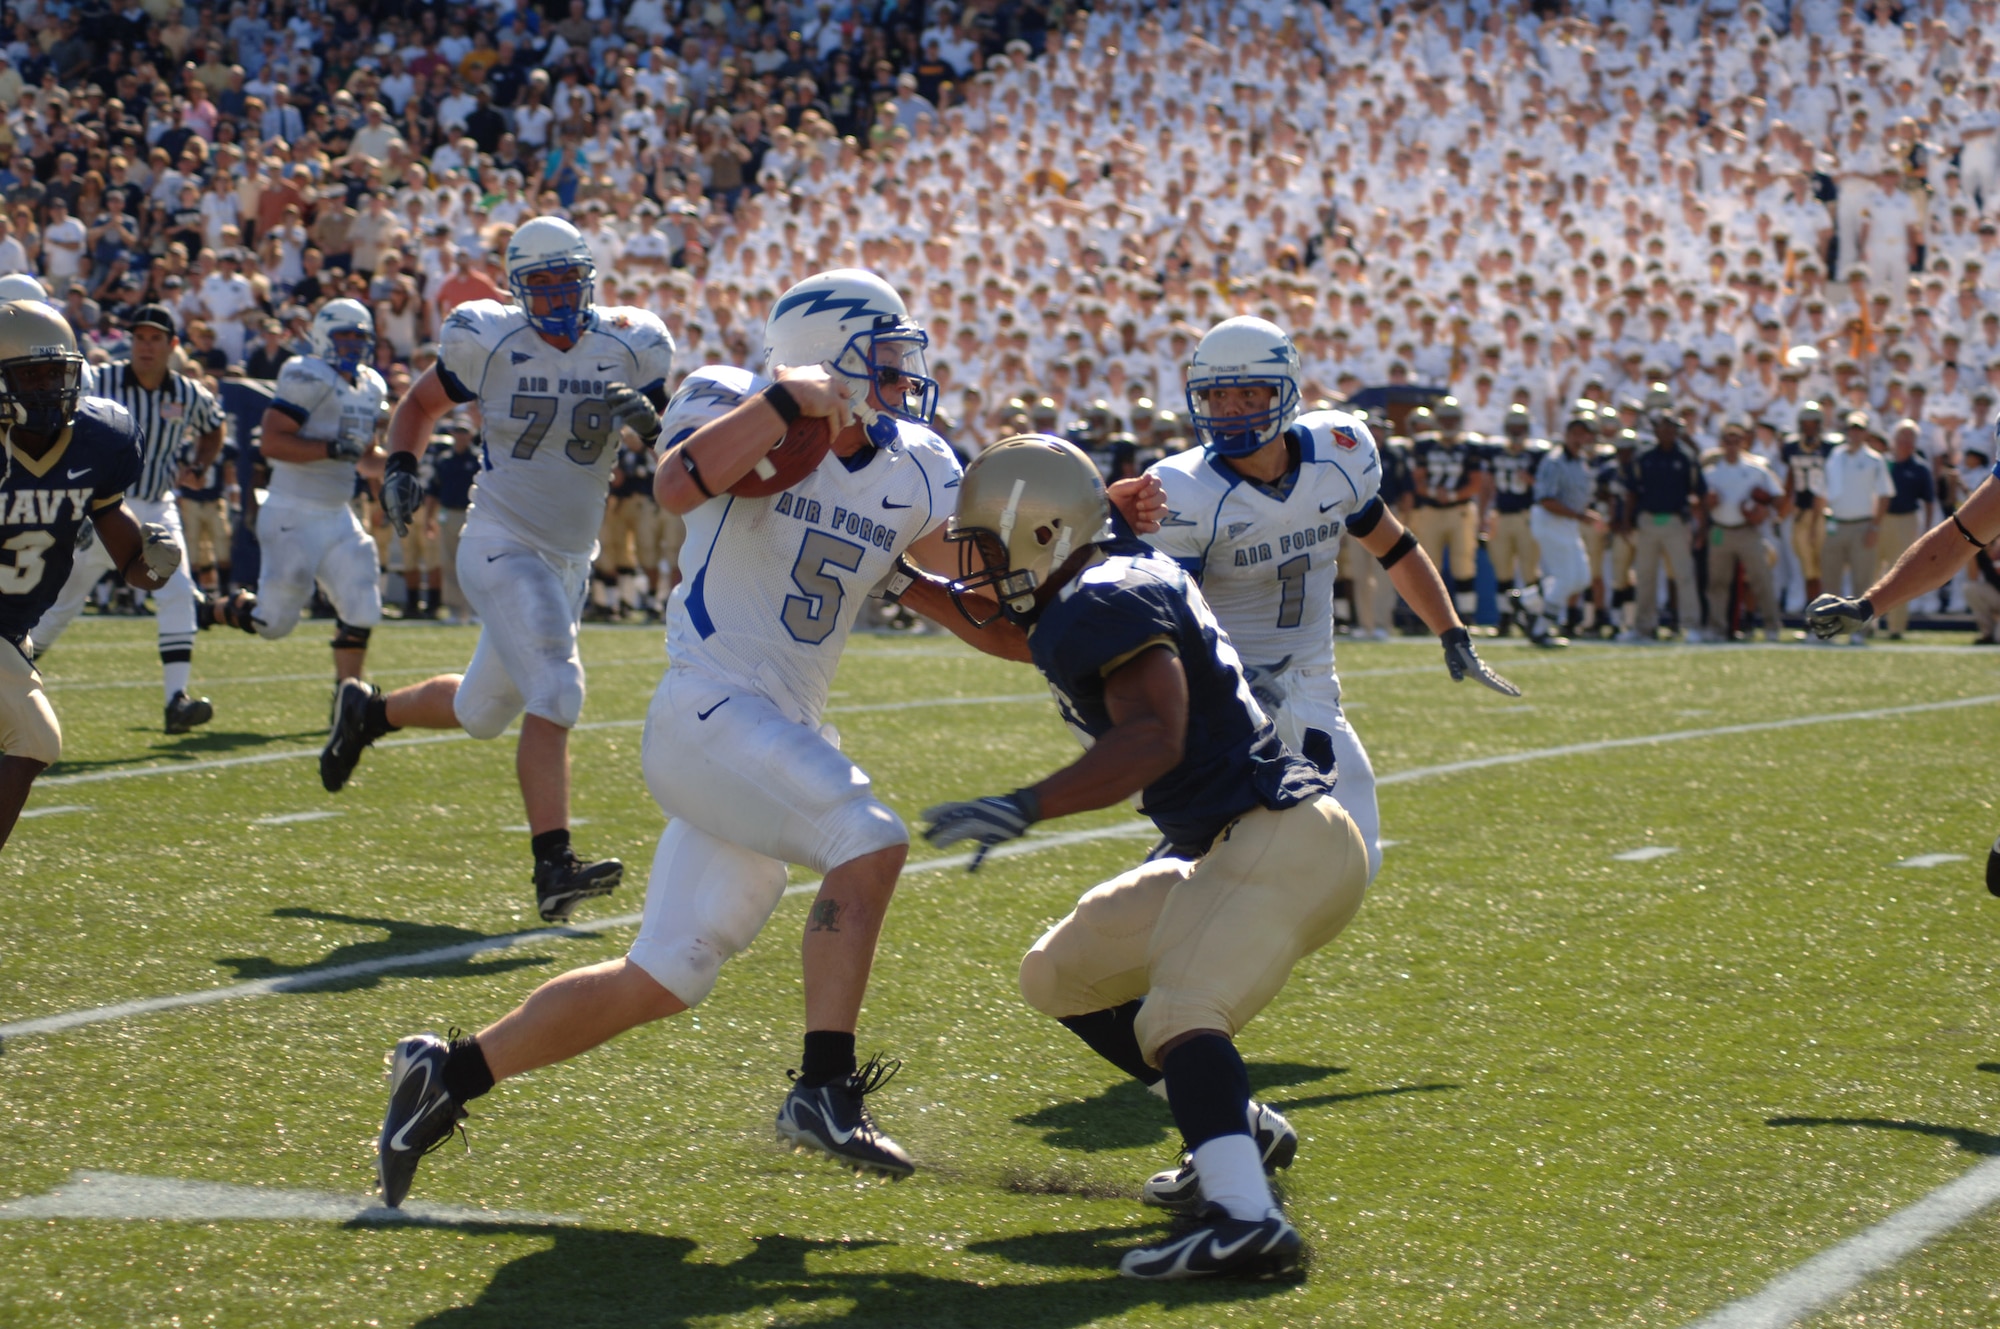 U.S. Air Force Academy Falcon quarterback Shaun Carney tries to sidestep a Navy defender during Air Force's 31-20 loss to Navy Sept. 29 at Annapolis, Md. The senior signal caller gained 300 total yards to become the program's all-time leader in total yards from scrimmage with 6,780. (U.S. Air Force photo/Capt. Jillian Torango) 
